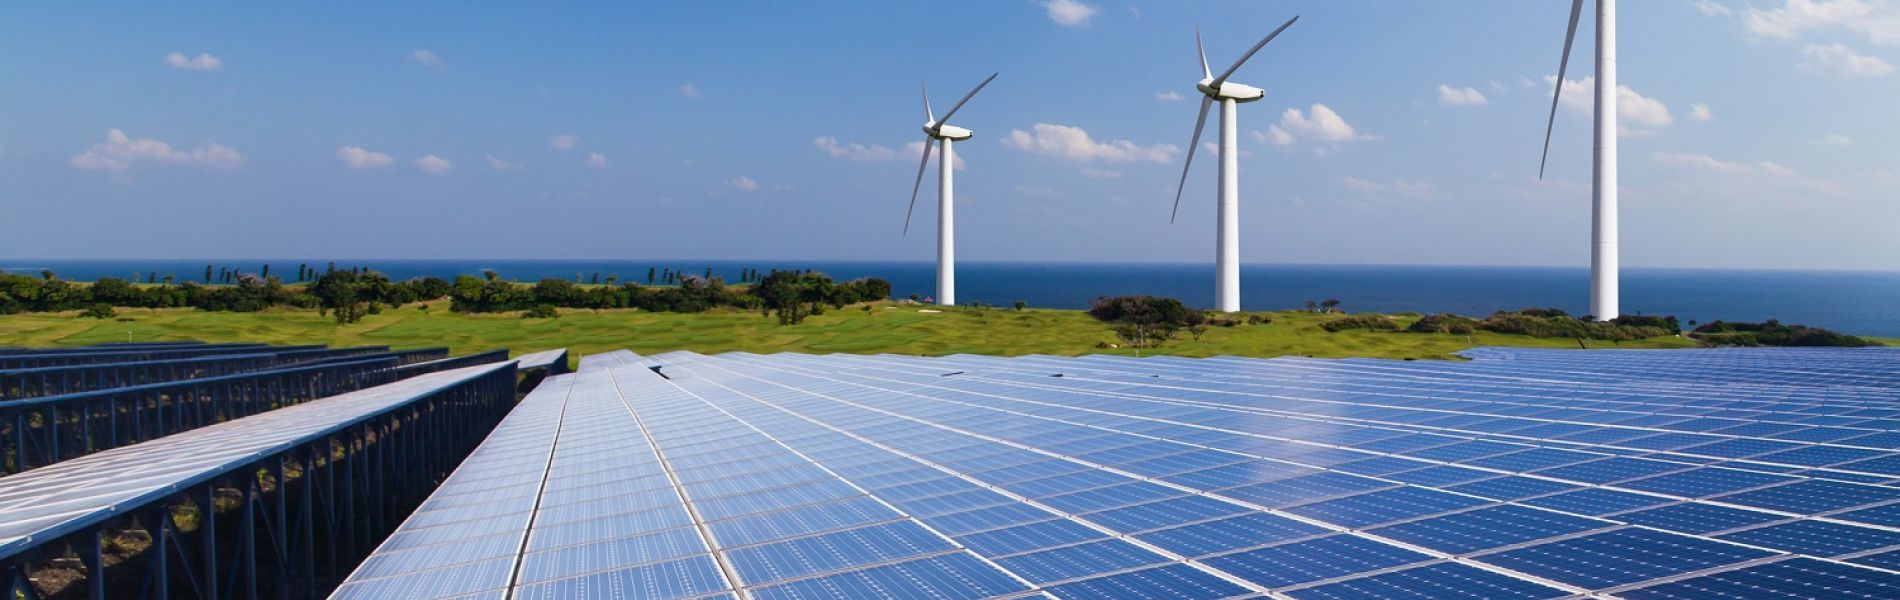 How to Implement Renewable Energy in Your Organization